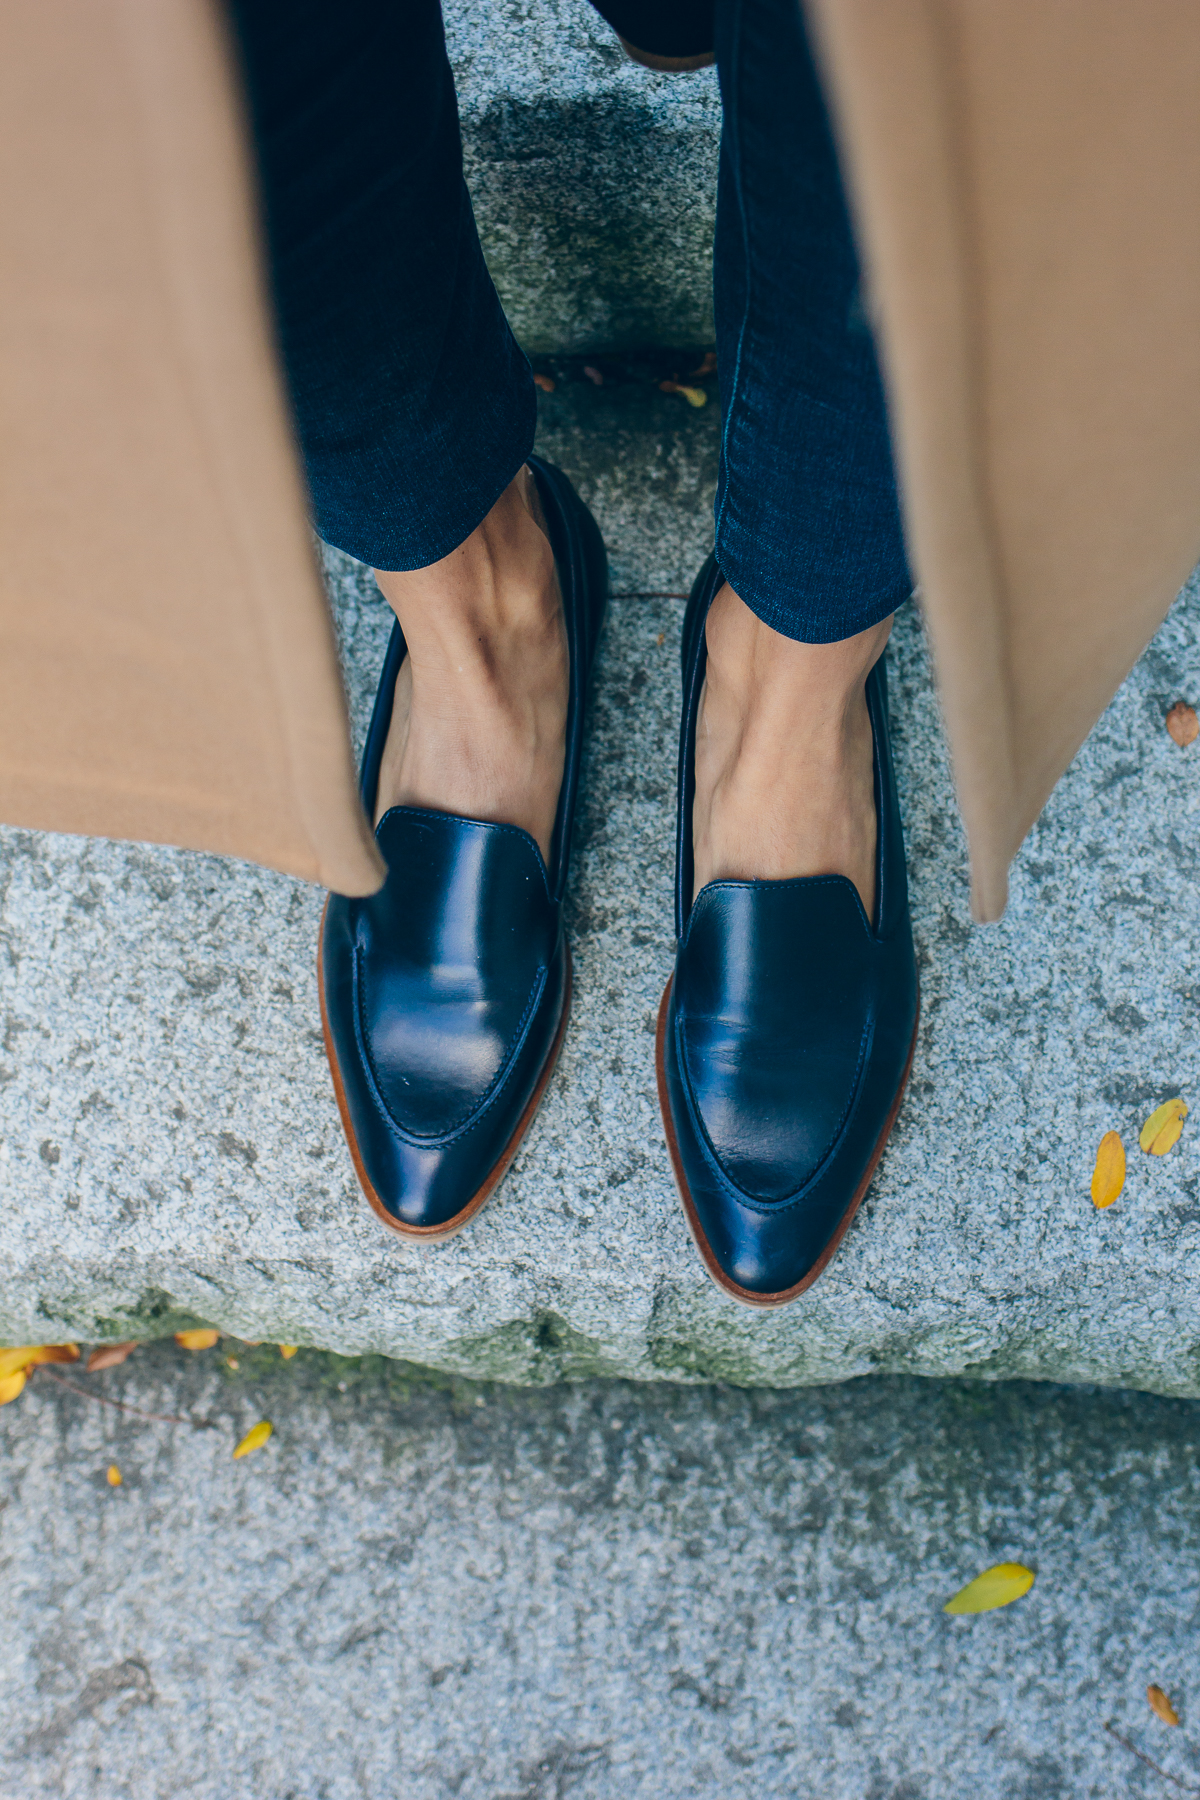 chic navy loafers — via @TheFoxandShe